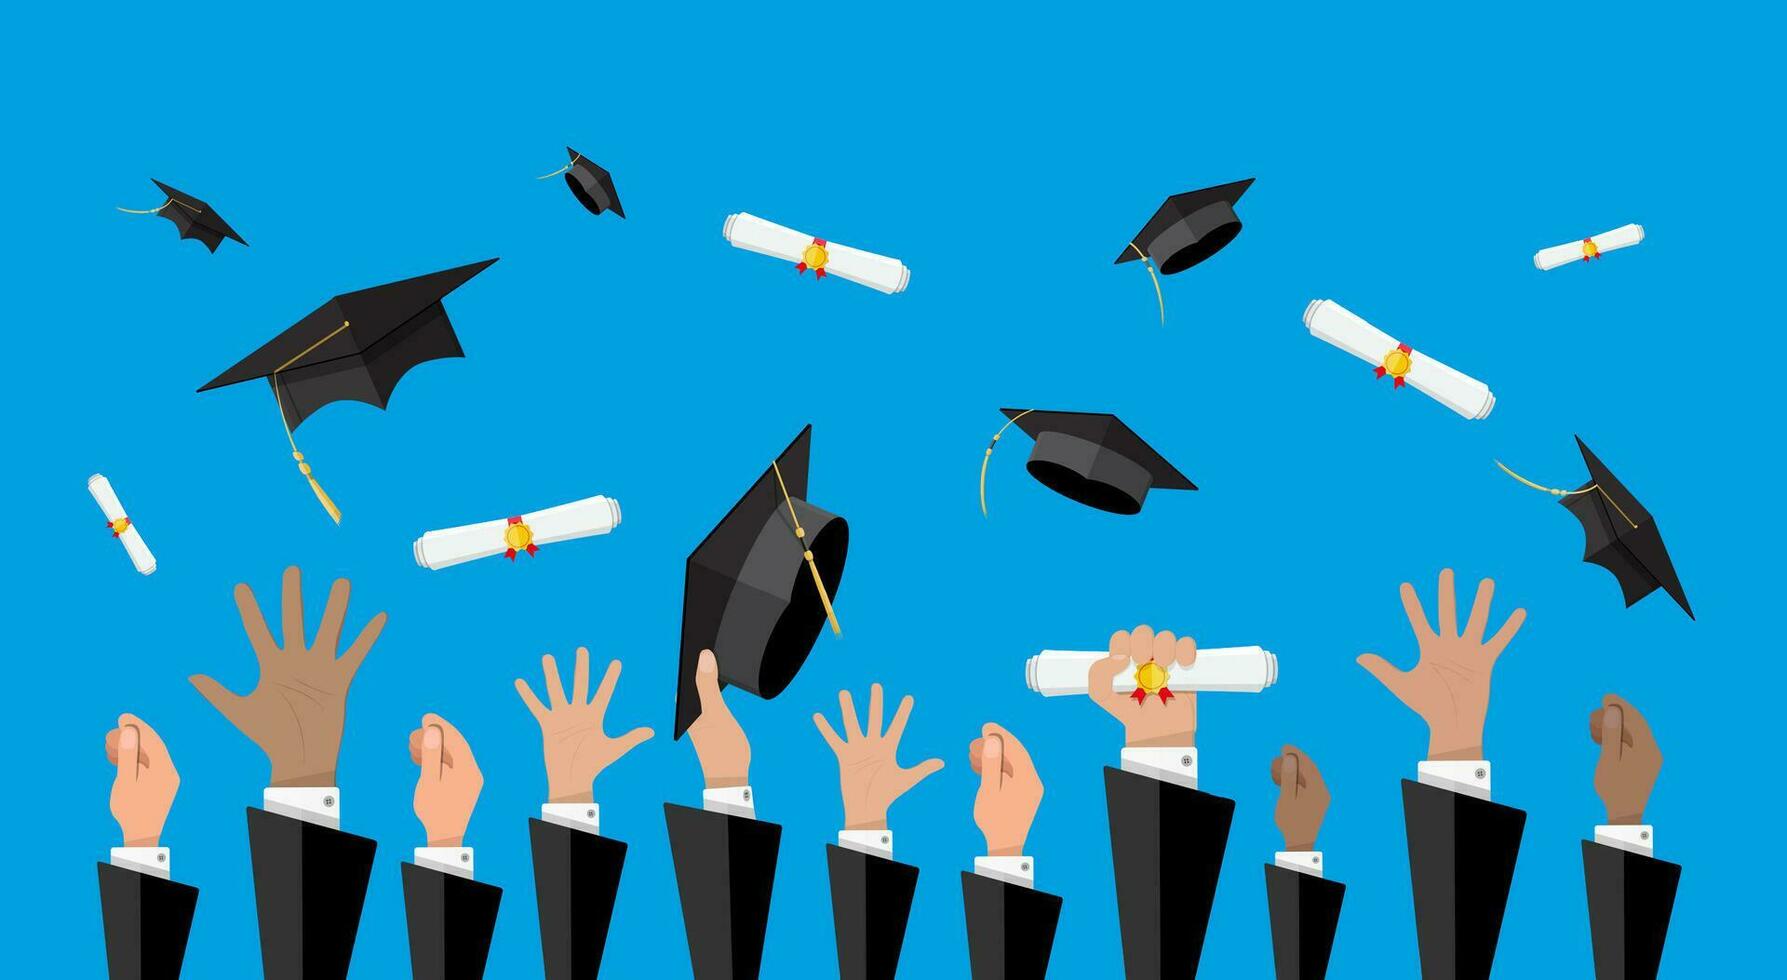 Hands of graduates throwing graduation hats and diplomas in the air. Concept of education. College or university ceremony. Vector illustration in flat style